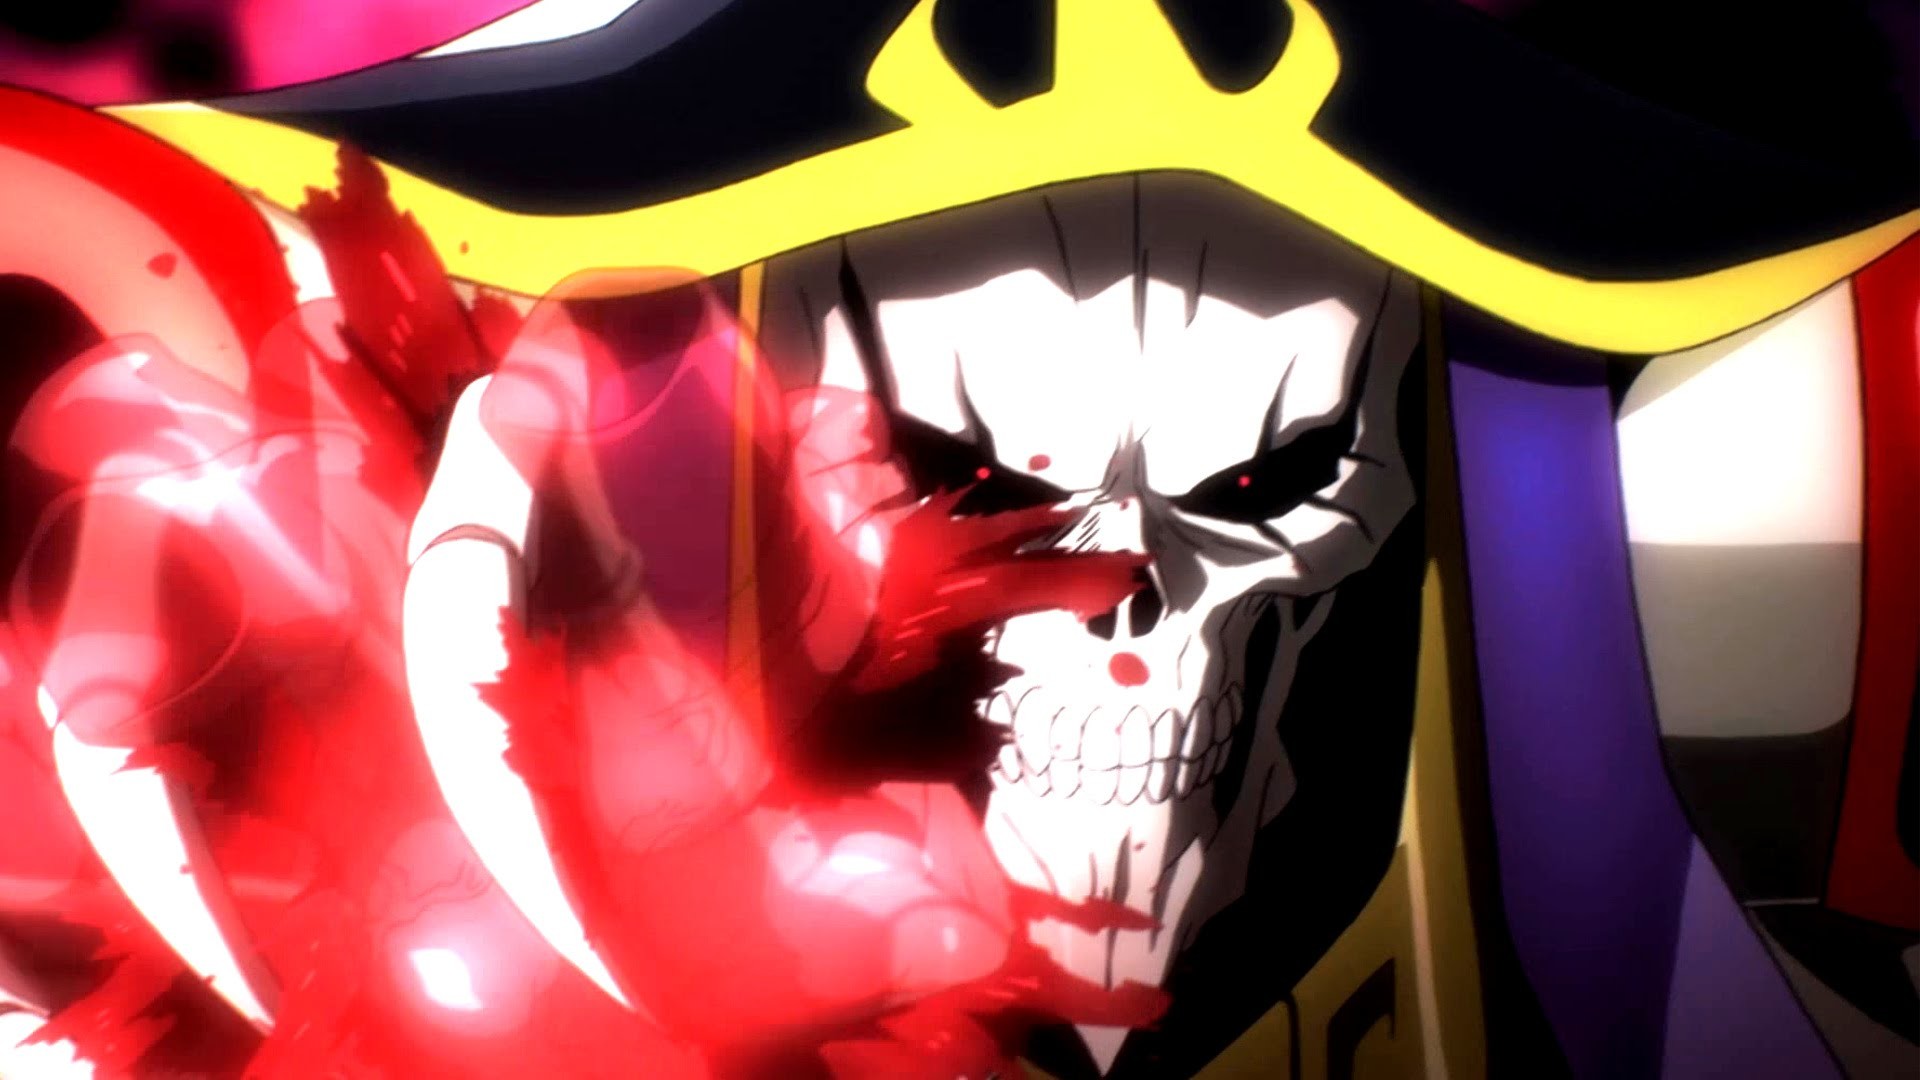 1920x1080 Overlord Episode 3 ãªã¼ãã¼ã­ã¼ã Anime Review - Ainz Ooal Gown's Darkness -  YouTube